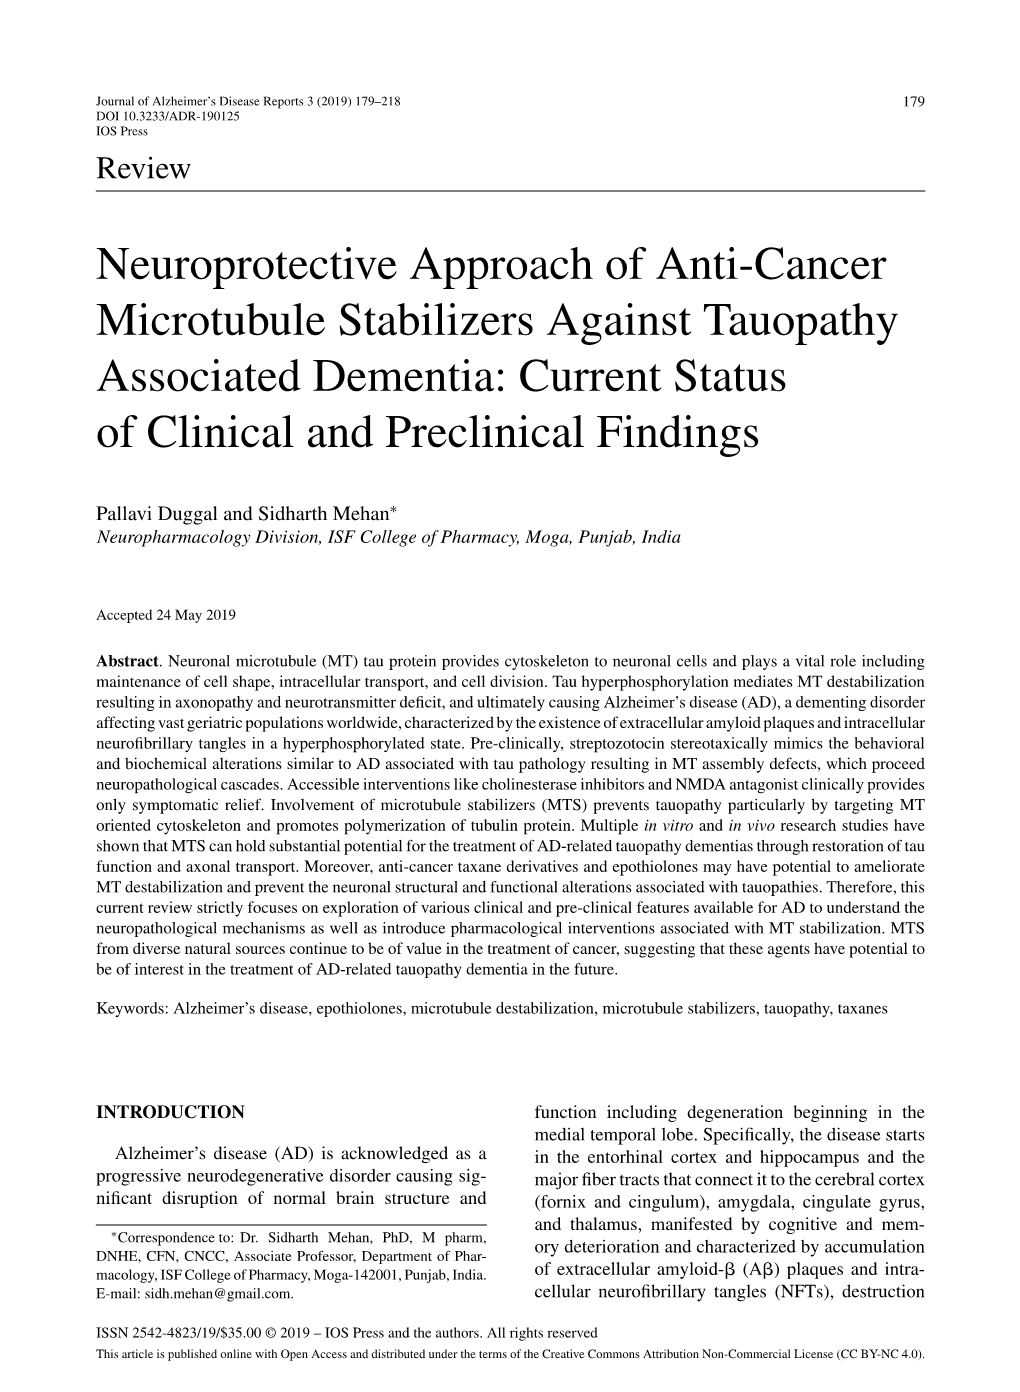 Neuroprotective Approach of Anti-Cancer Microtubule Stabilizers Against Tauopathy Associated Dementia: Current Status of Clinical and Preclinical Findings